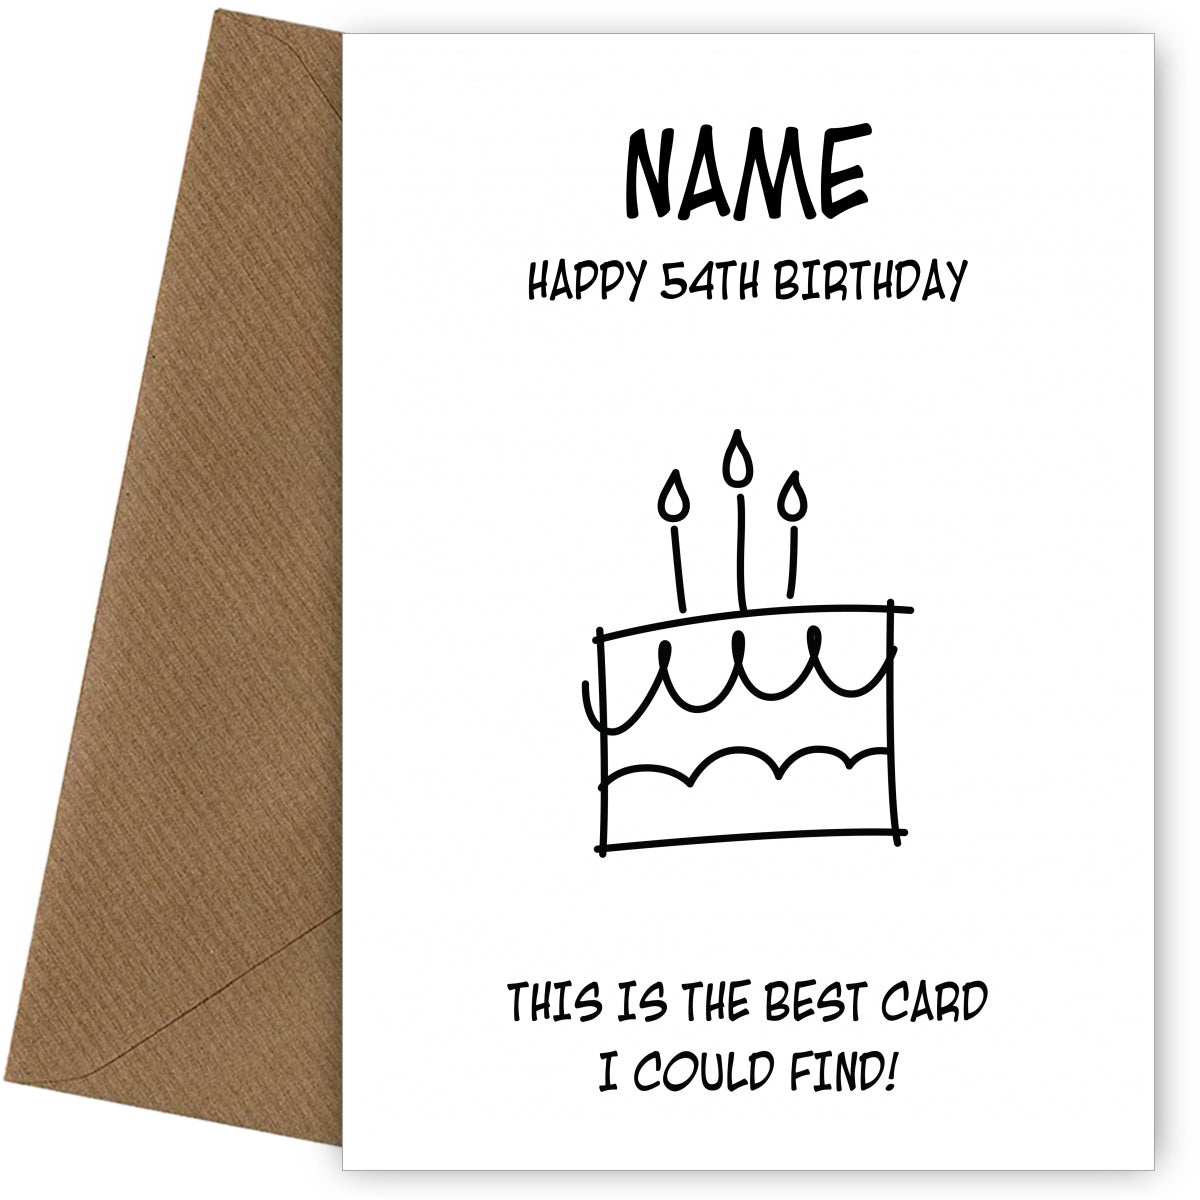 Happy 54th Birthday Card - Best Card I Could Find!